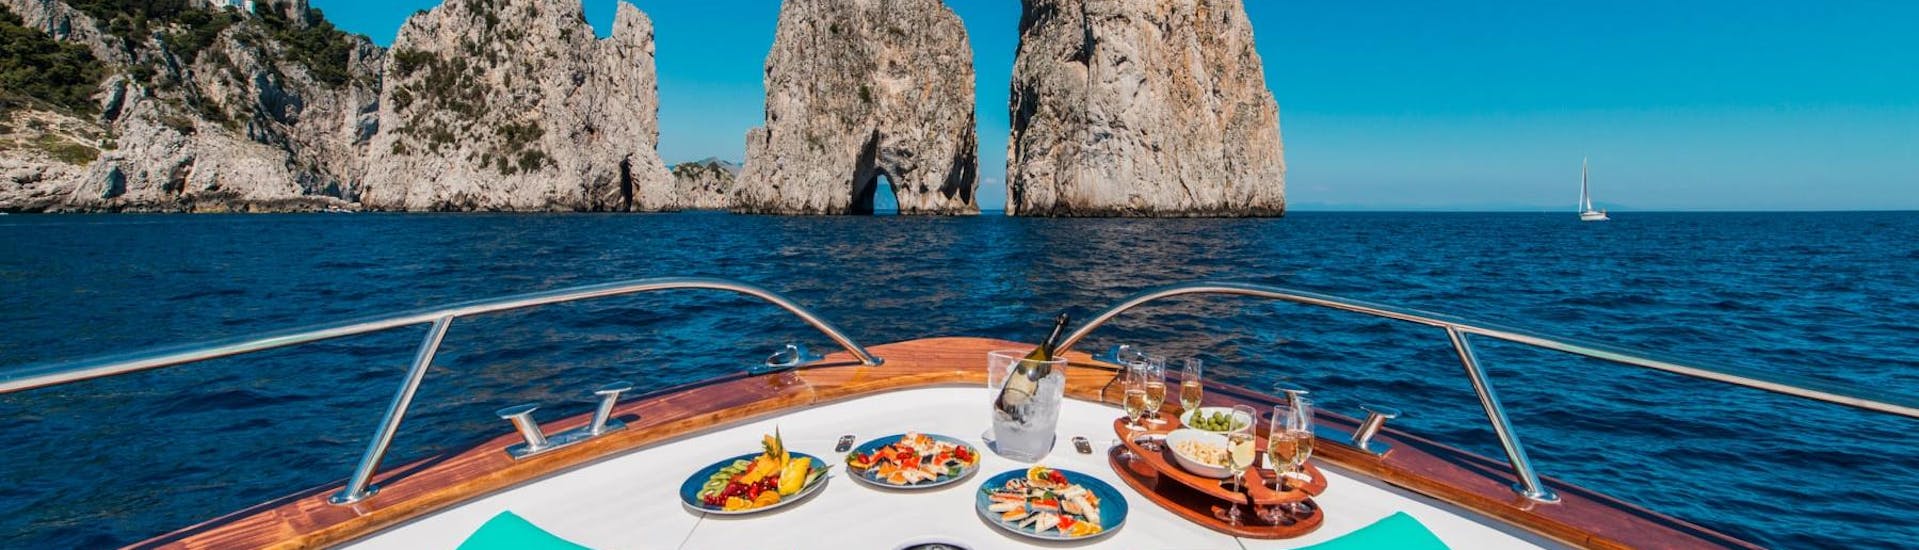 A delicious aperitif is served during one of the boat tours organized by You Know! Boat Sorrento.